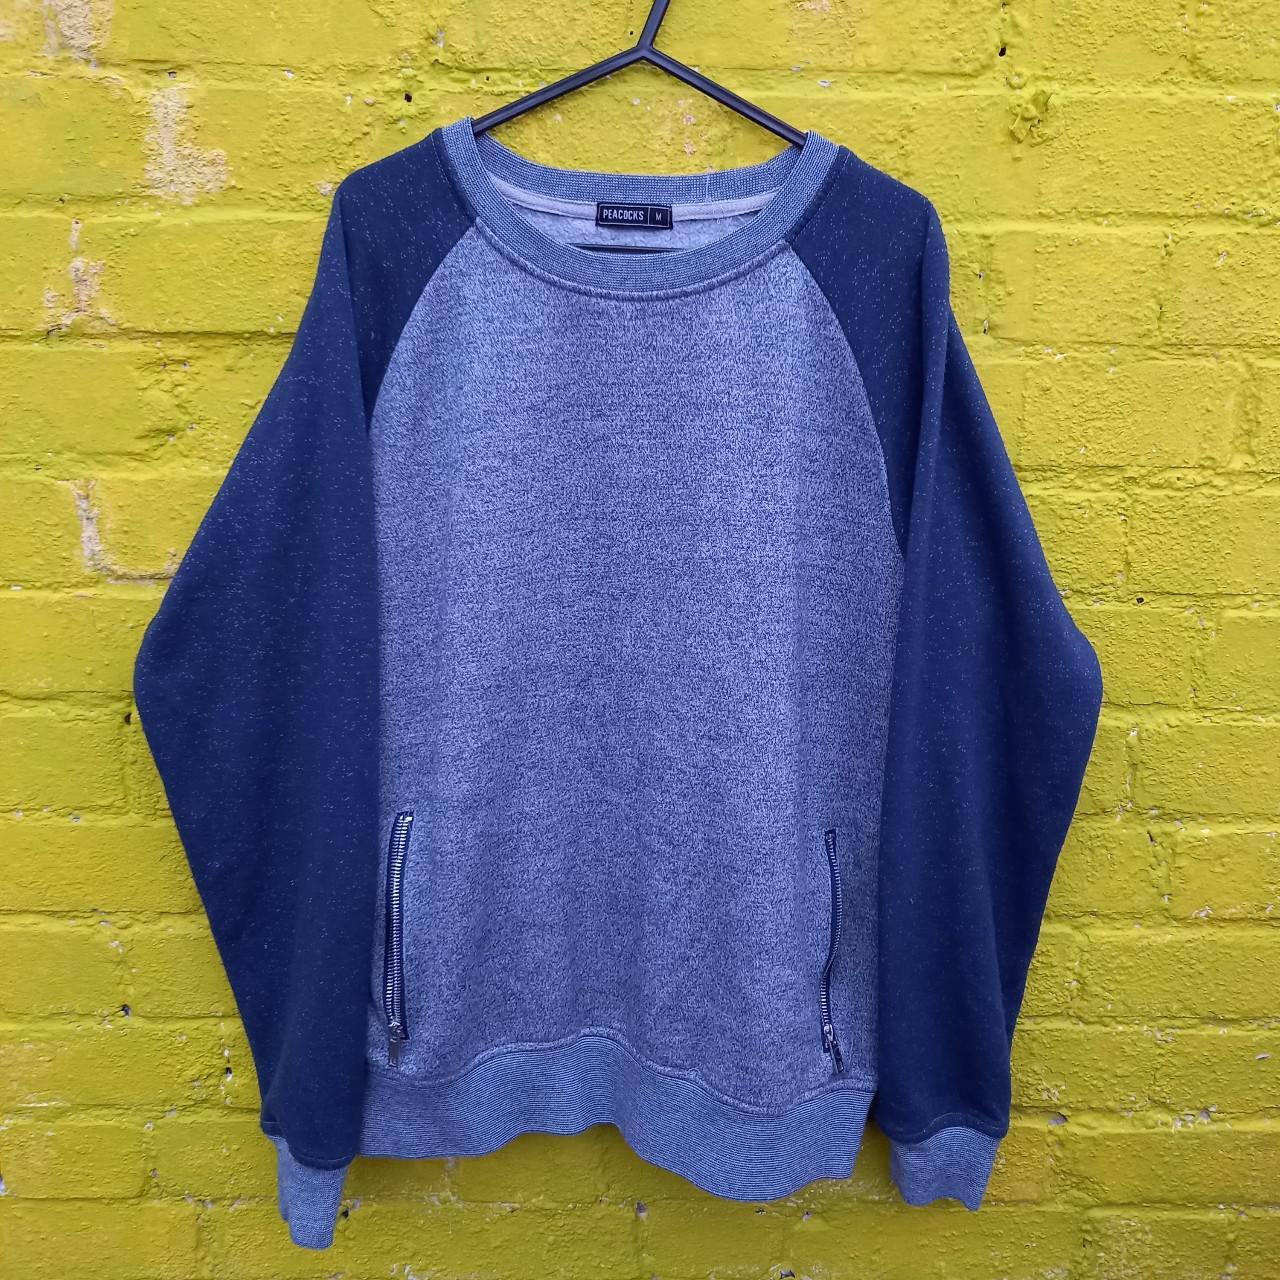 Peacocks navy and grey long sleeve thick jumper with... - Depop